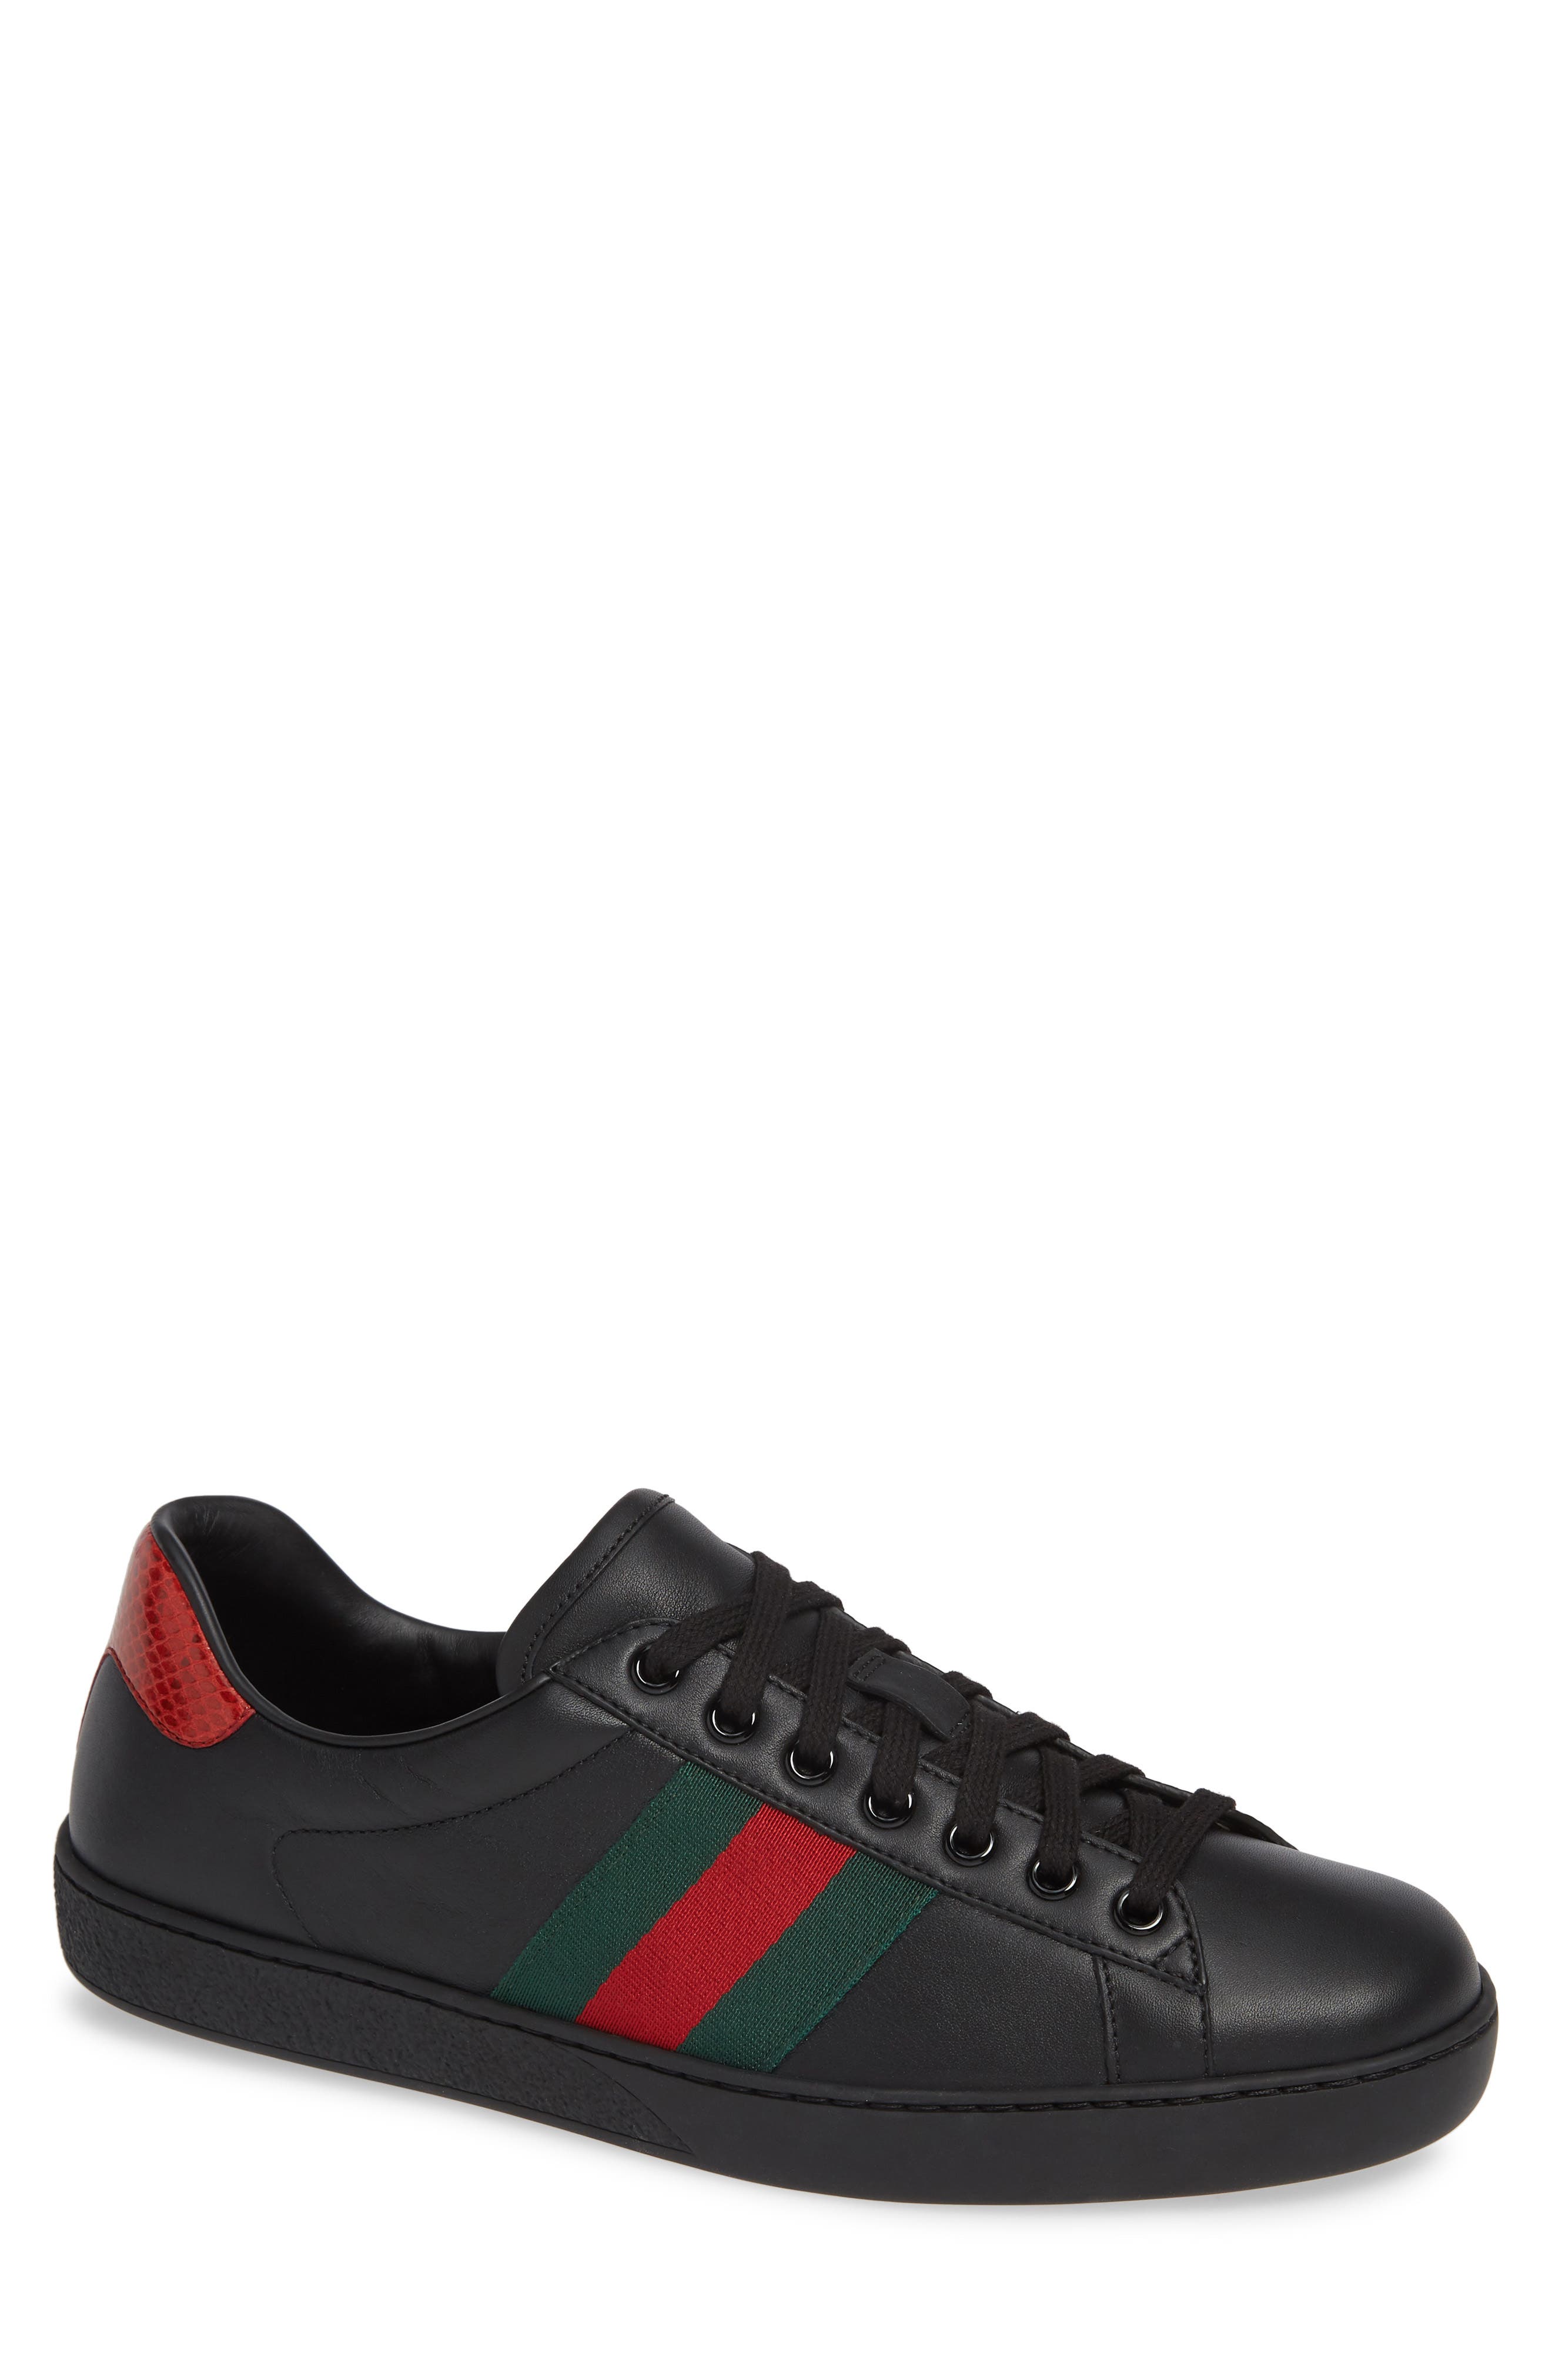 gucci all black shoes